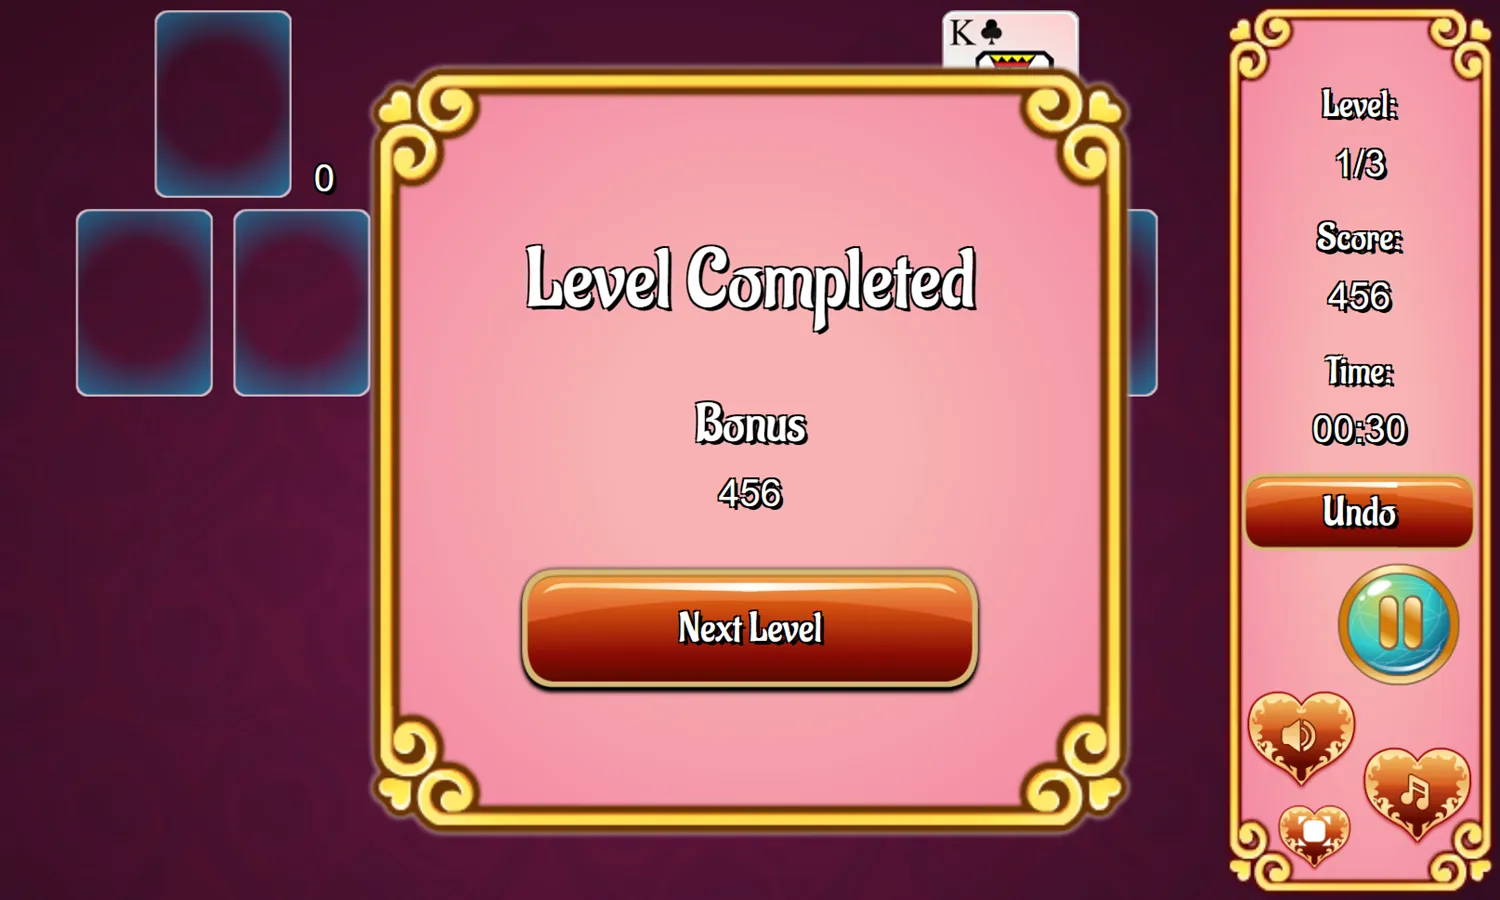 Ace of Hearts Game Level Completed Screenshot.